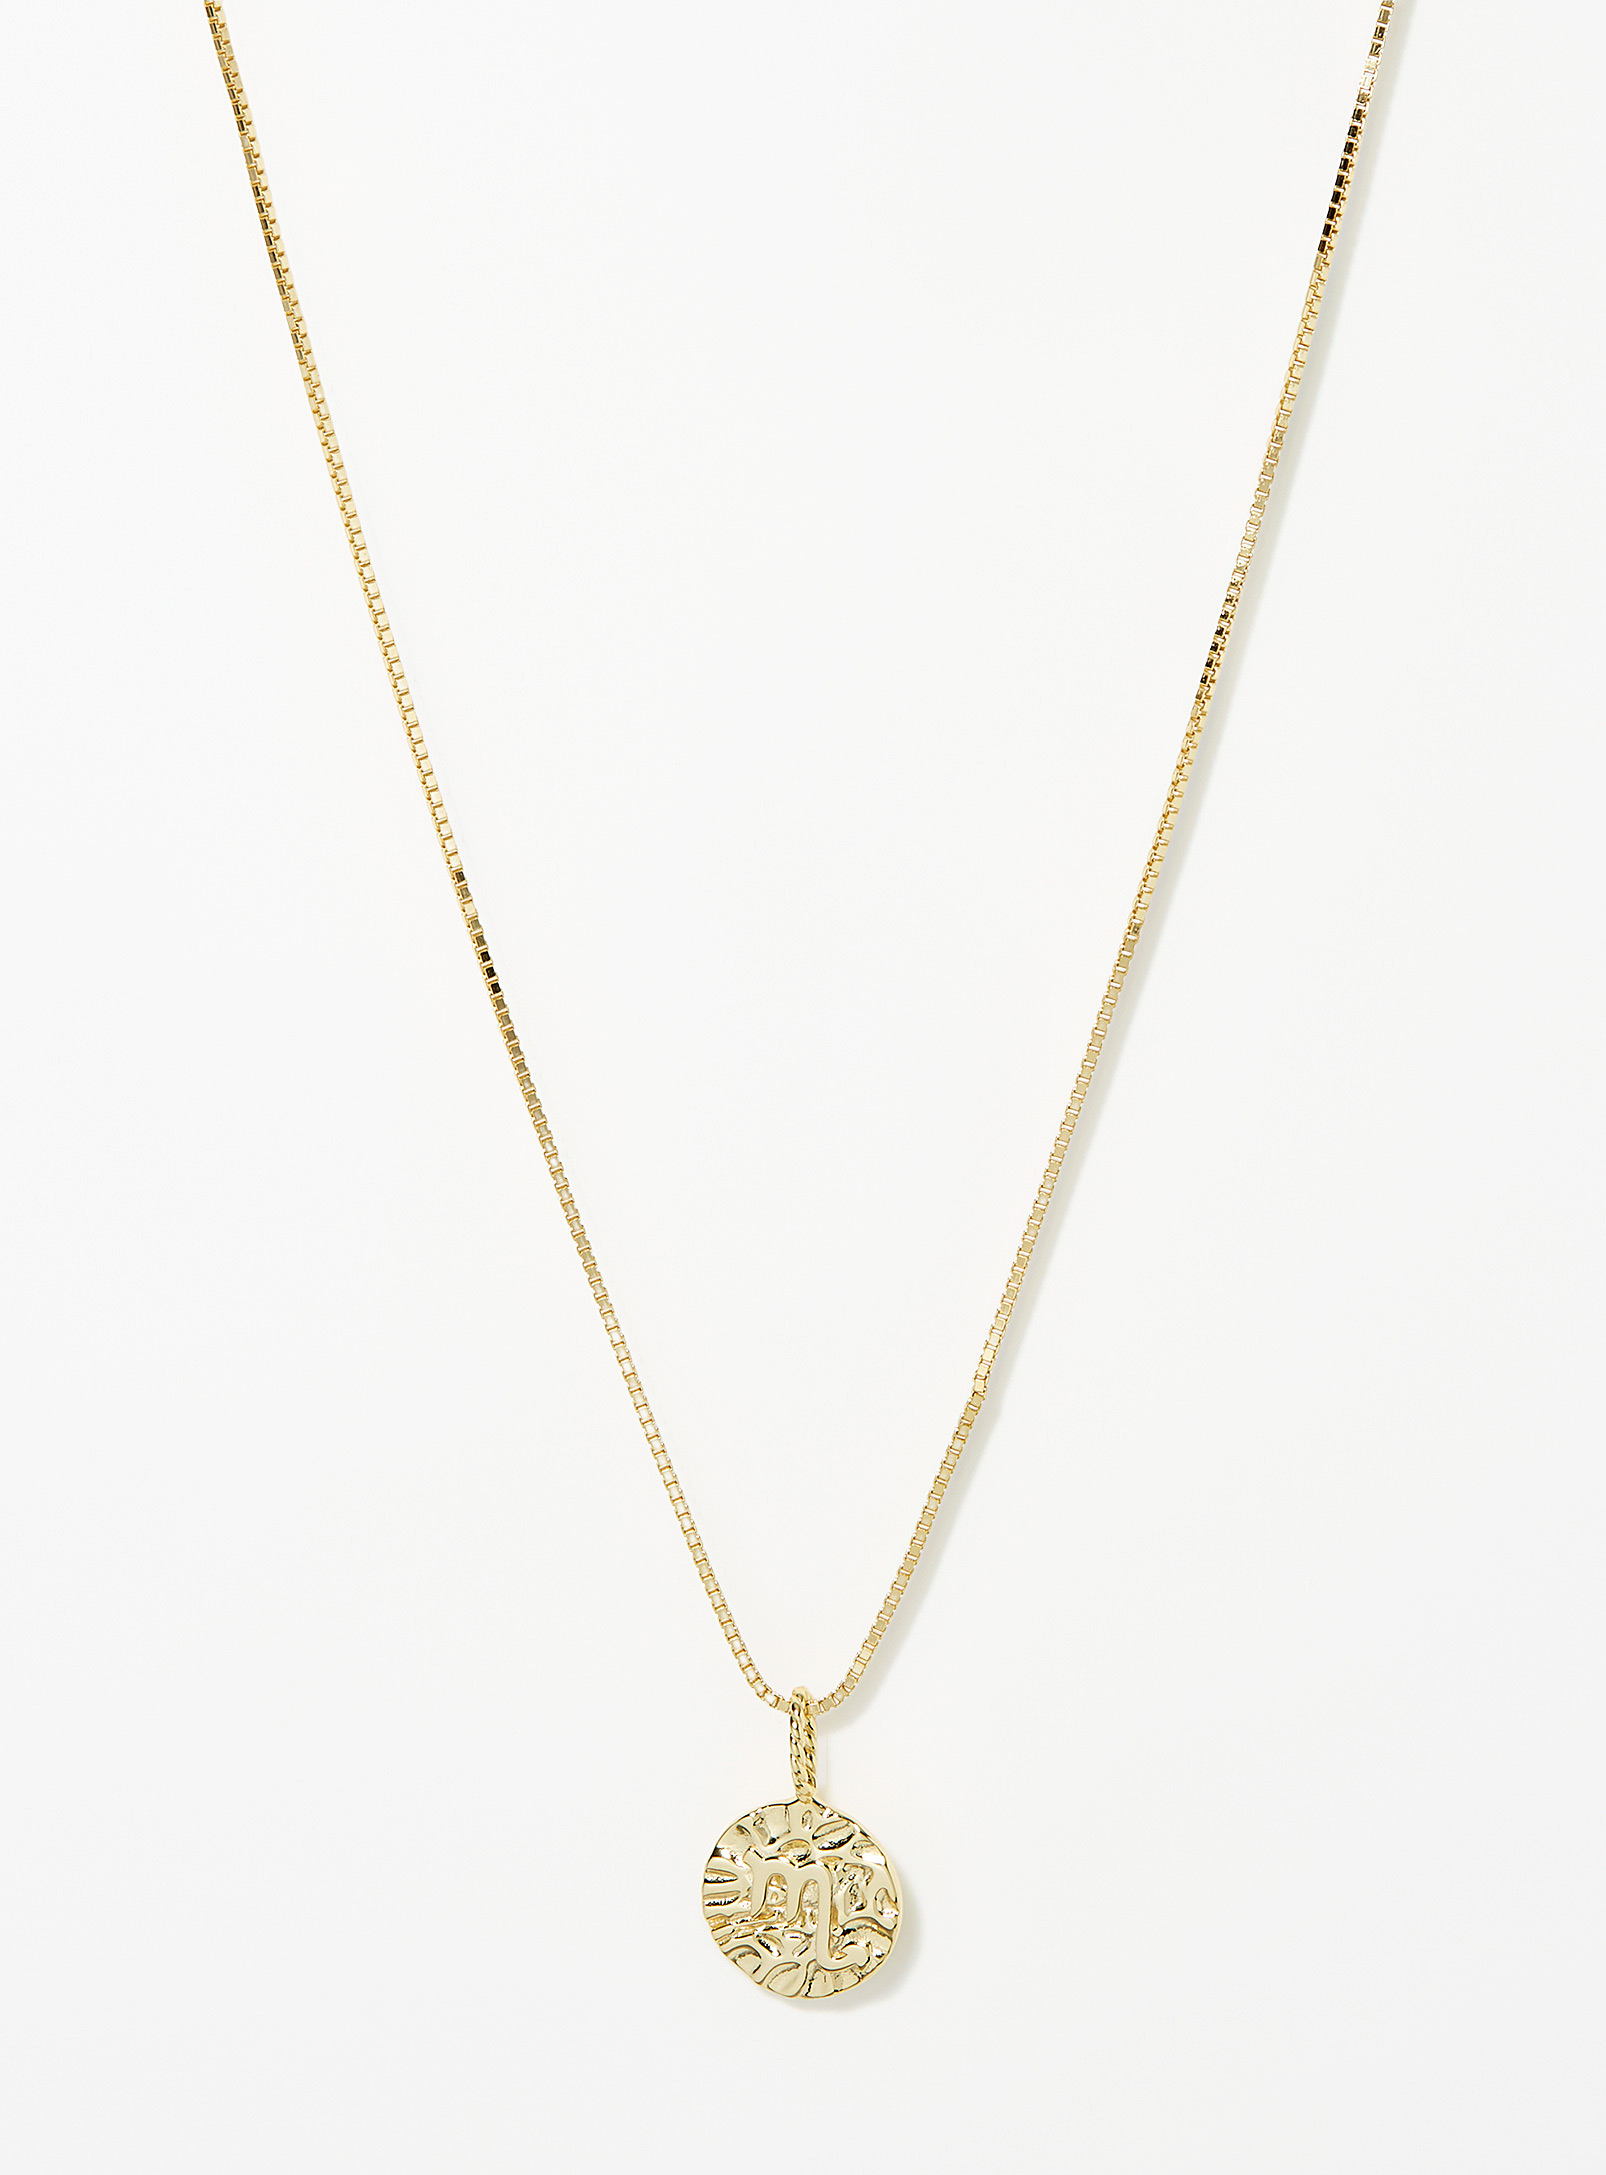 Midi34 X Simons Shimmery Astro Necklace In Ivory White